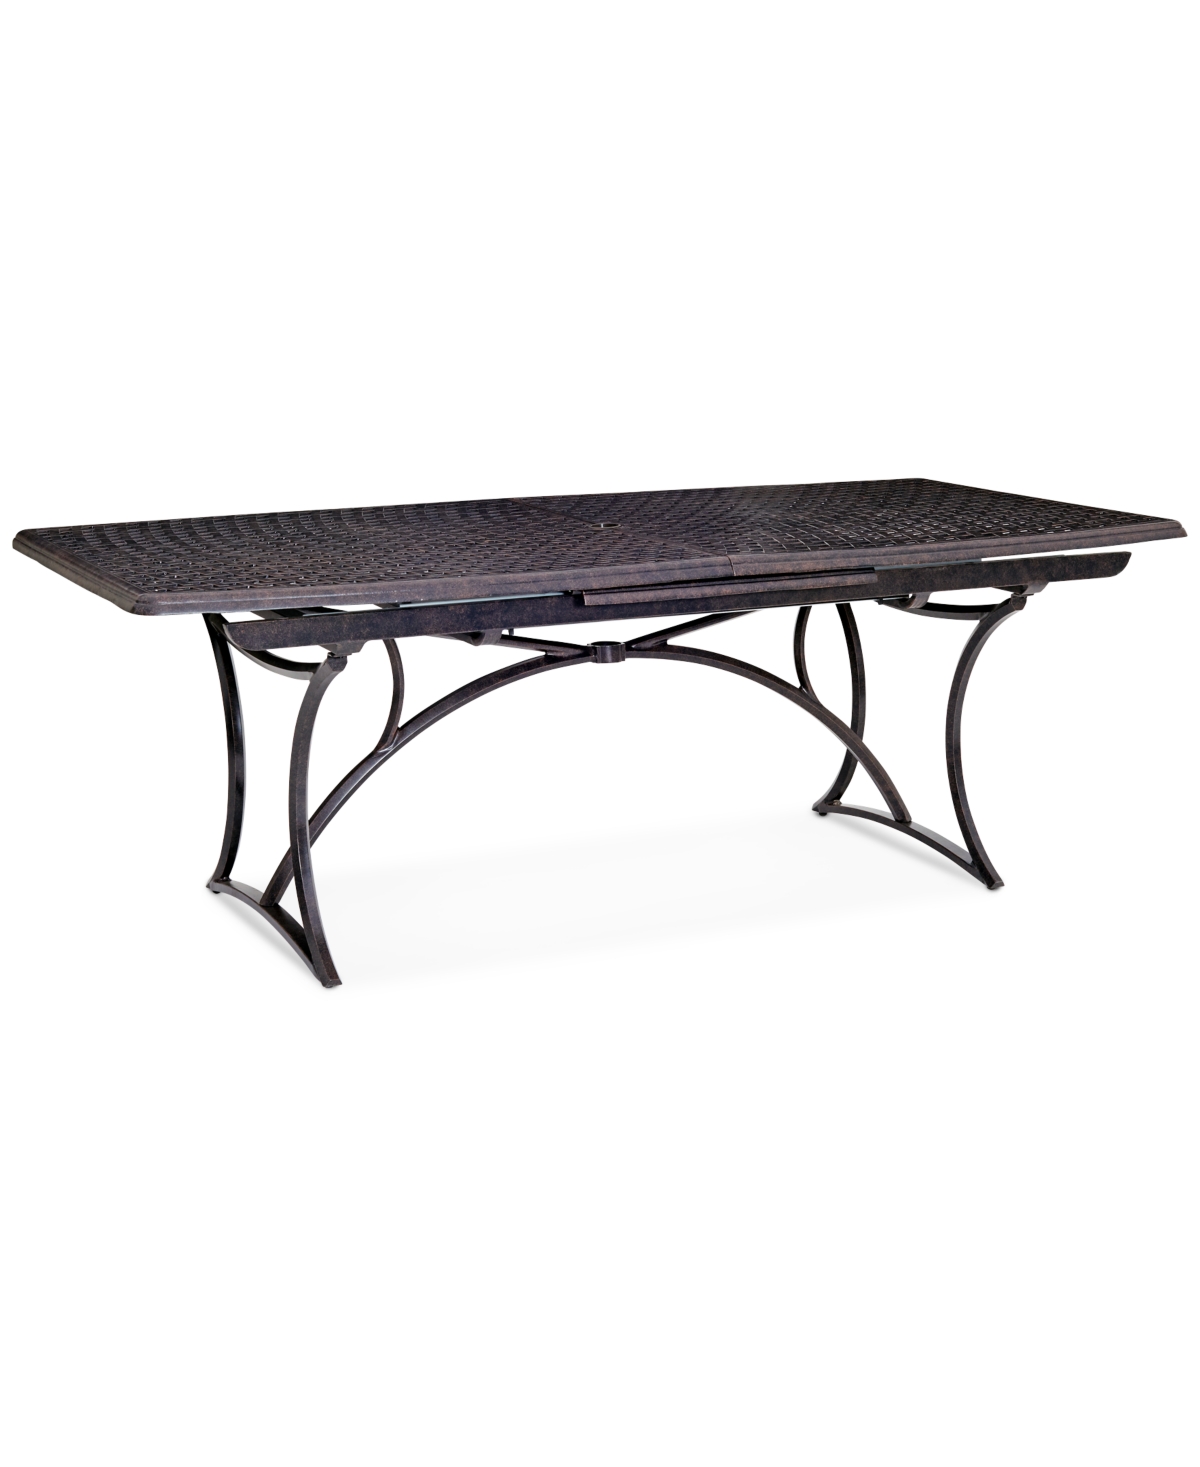 Agio Wythburn Mix And Match 110"x 42" Cast Aluminum Outdoor Extension Dining Table In Bronze Finish